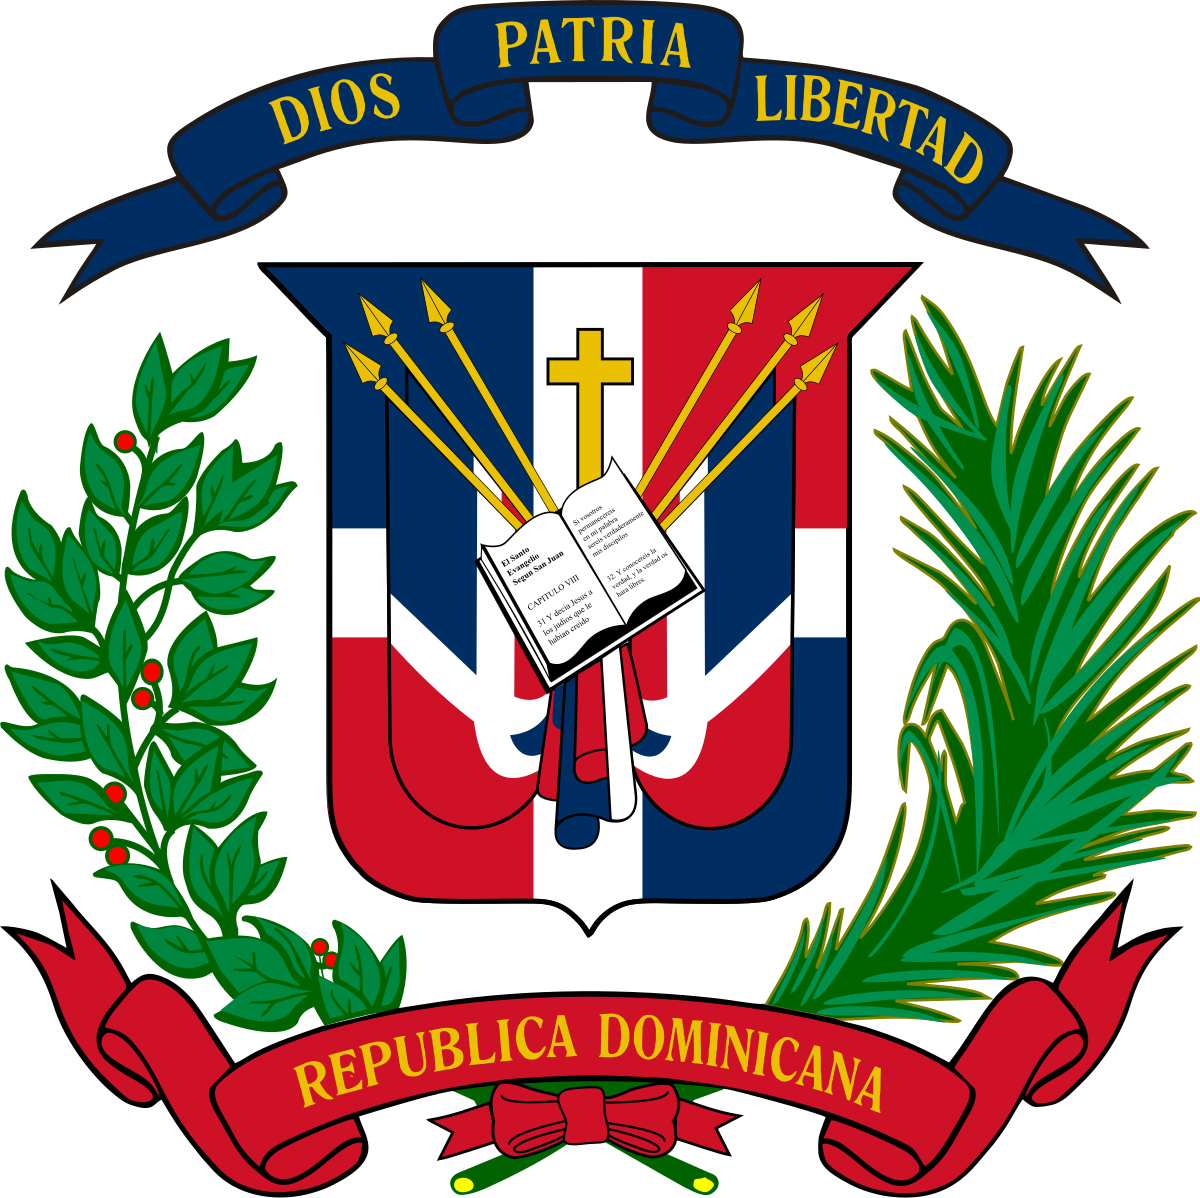 President clipart republic government. Congress of the dominican